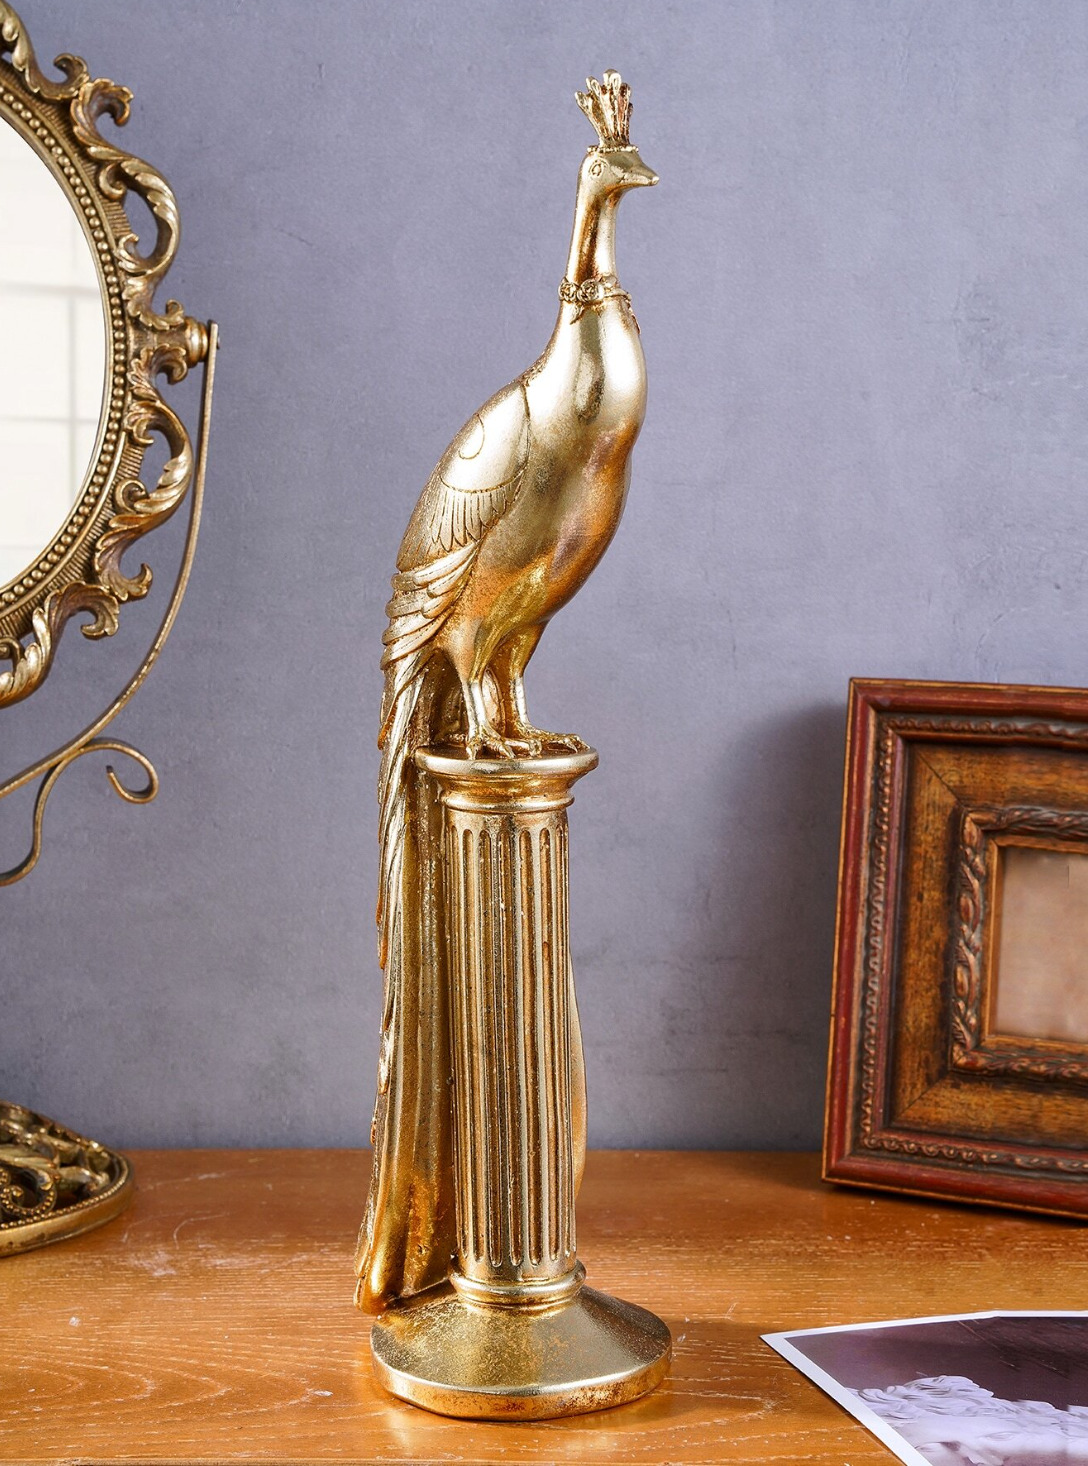 Peacock Statue Decorative Figurine Vintage Style With Hanging Tail Home Decor